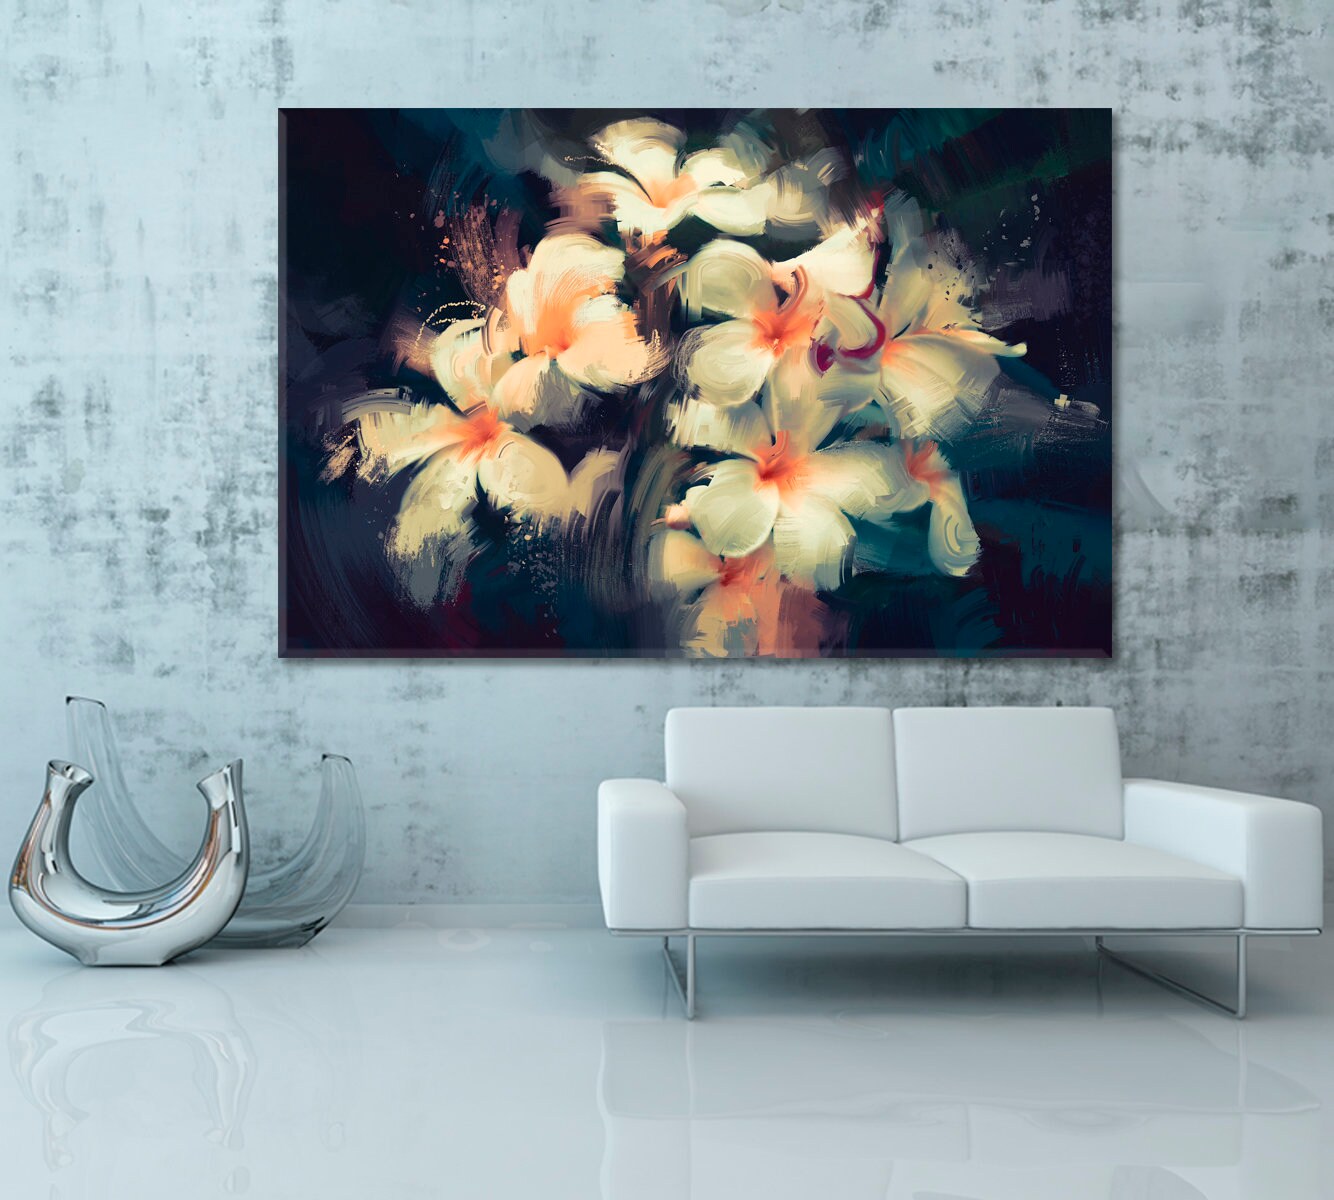 LARGE TEAL CANVAS PICTURES FLORAL FLOWER PAINTING WALL ART SPLIT MULTI 100 cm 